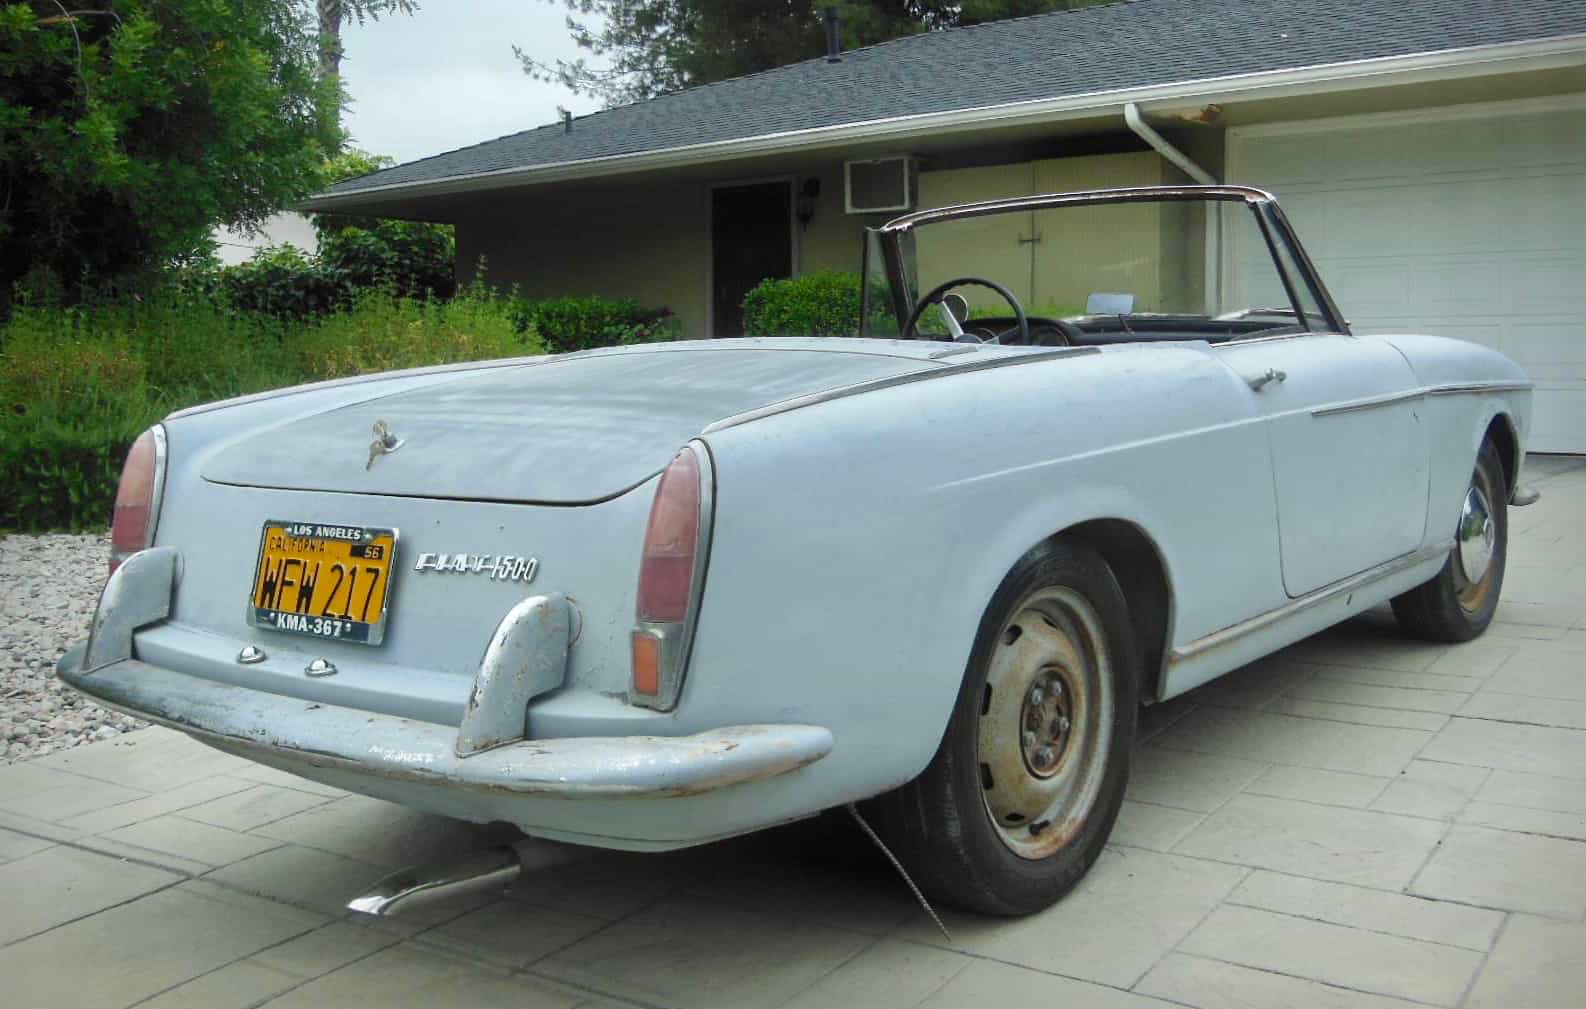 1960 Fiat Spider, Pick of the Day is a 1960 Fiat Spider in need of restoration, ClassicCars.com Journal